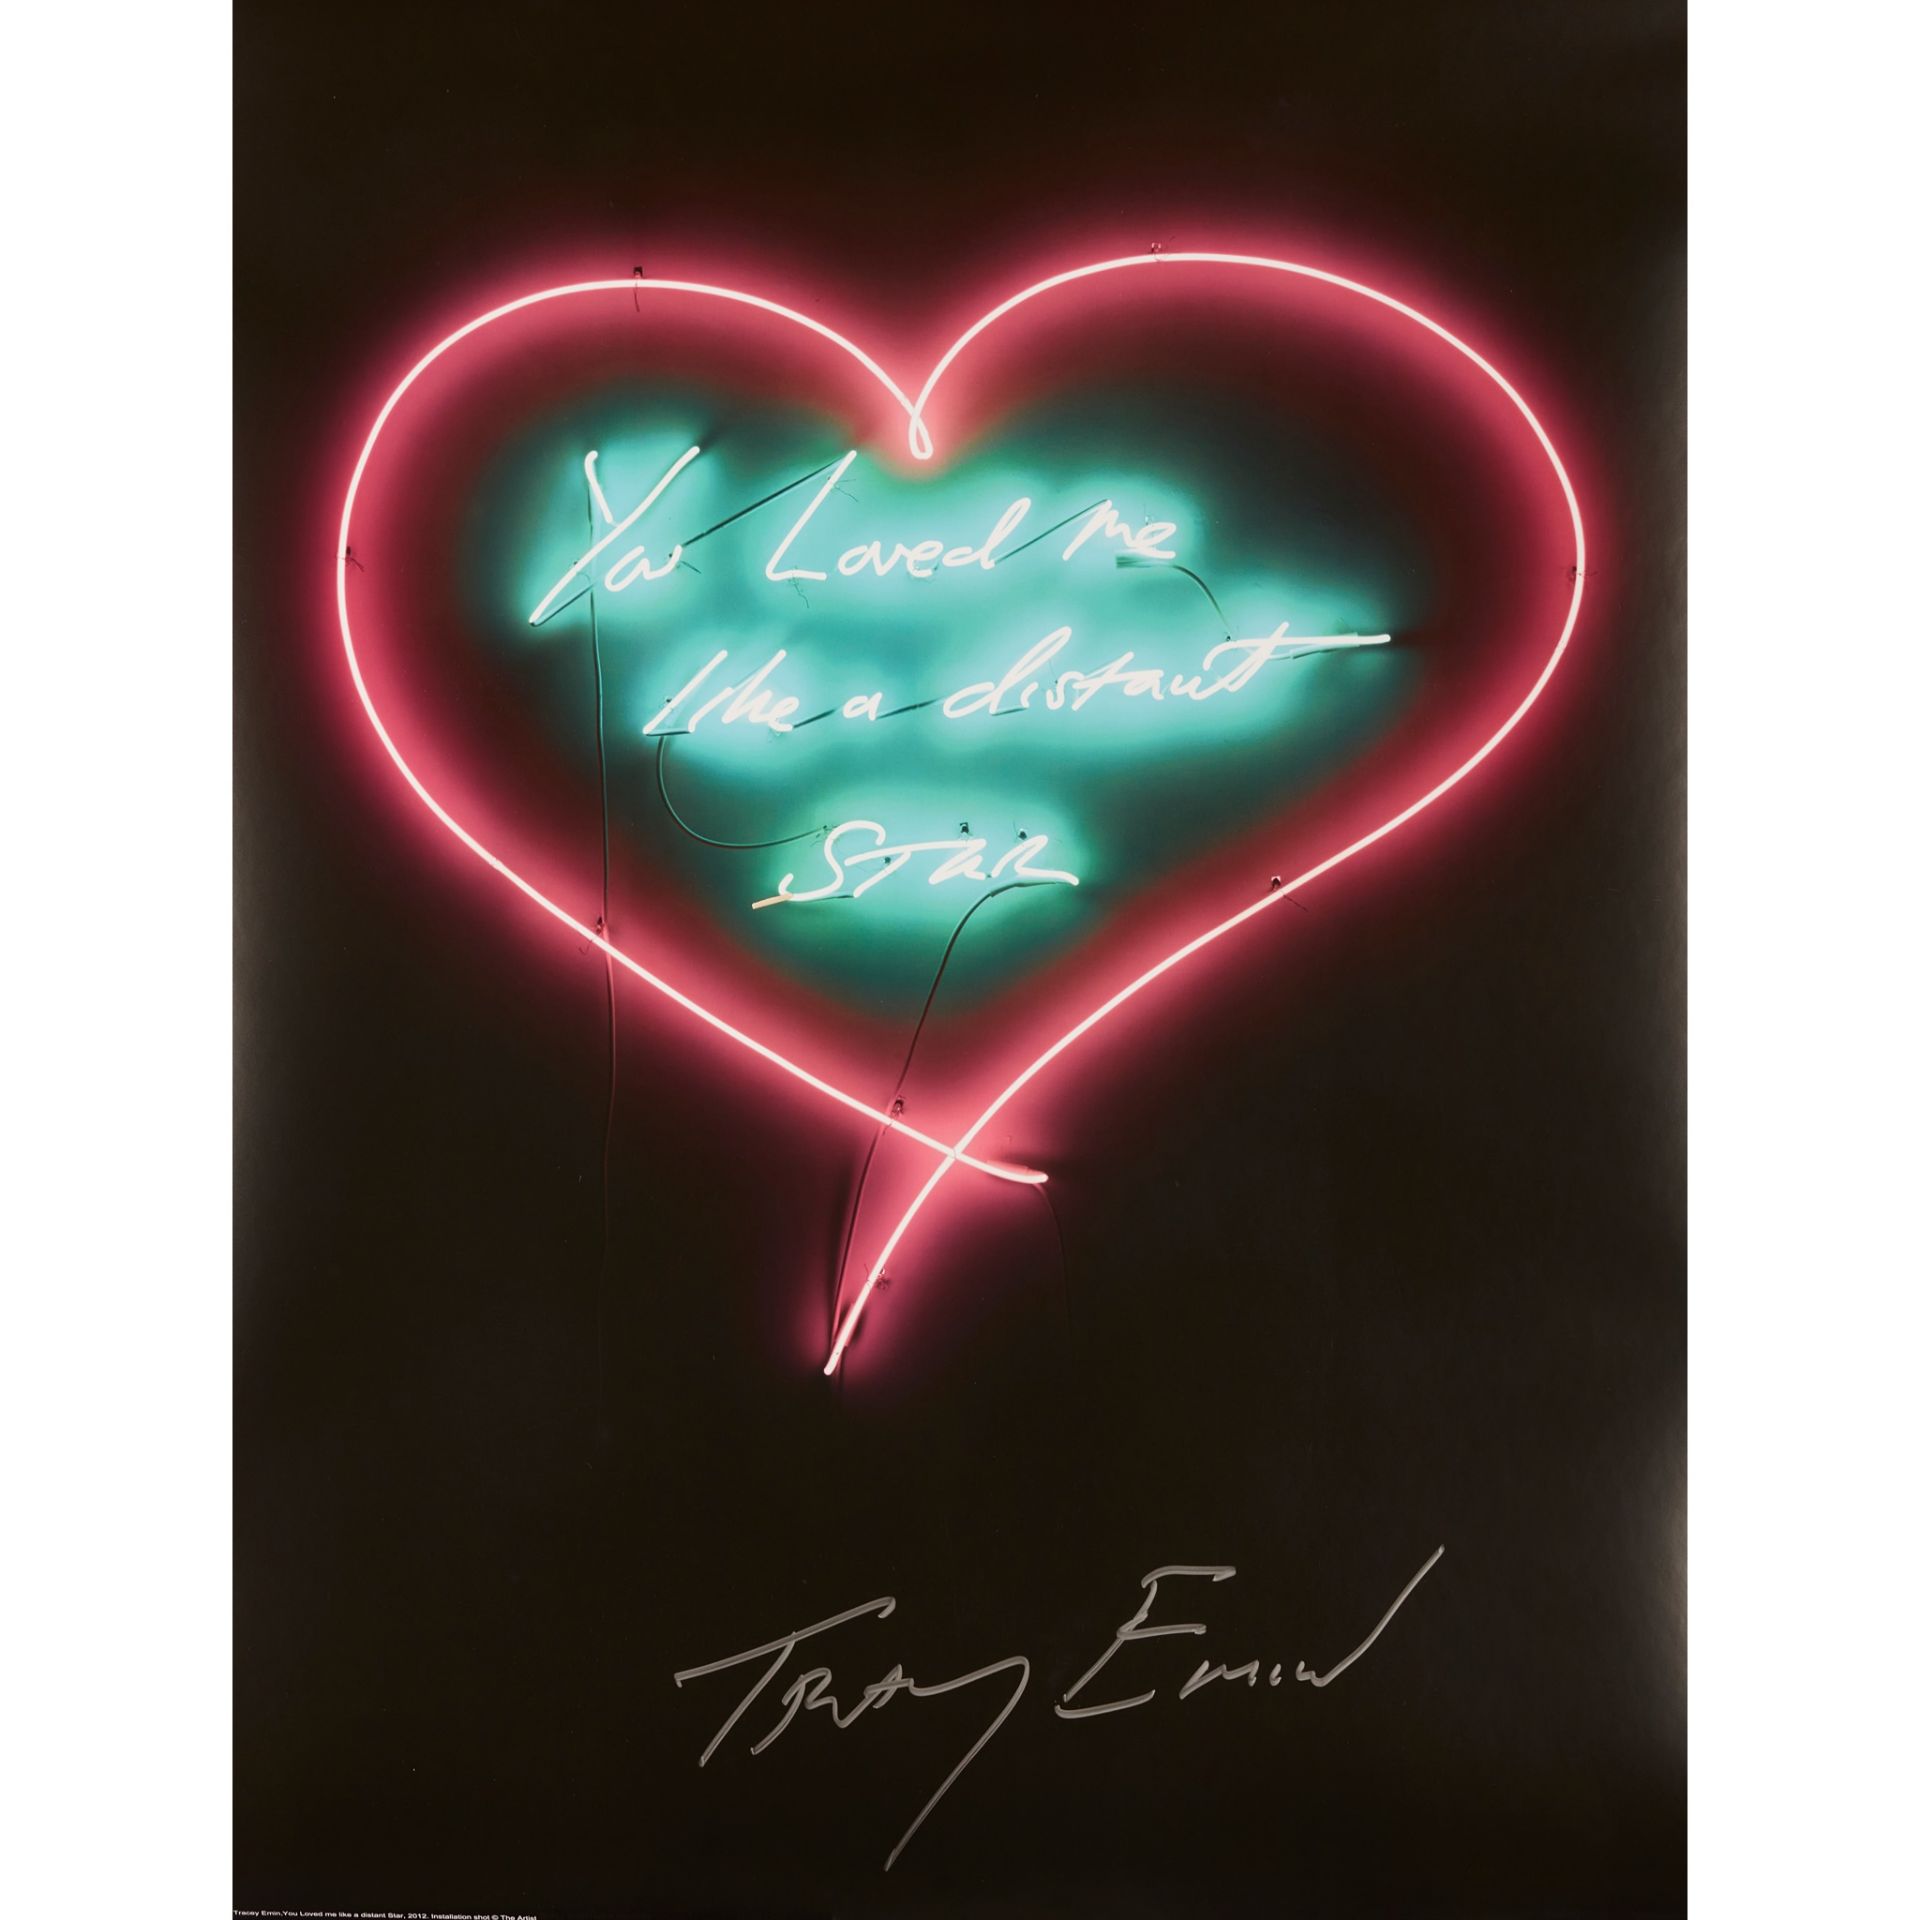 § TRACEY EMIN C.B.E., R.A. (BRITISH 1963-) YOU LOVED ME LIKE A DISTANT STAR - 2016